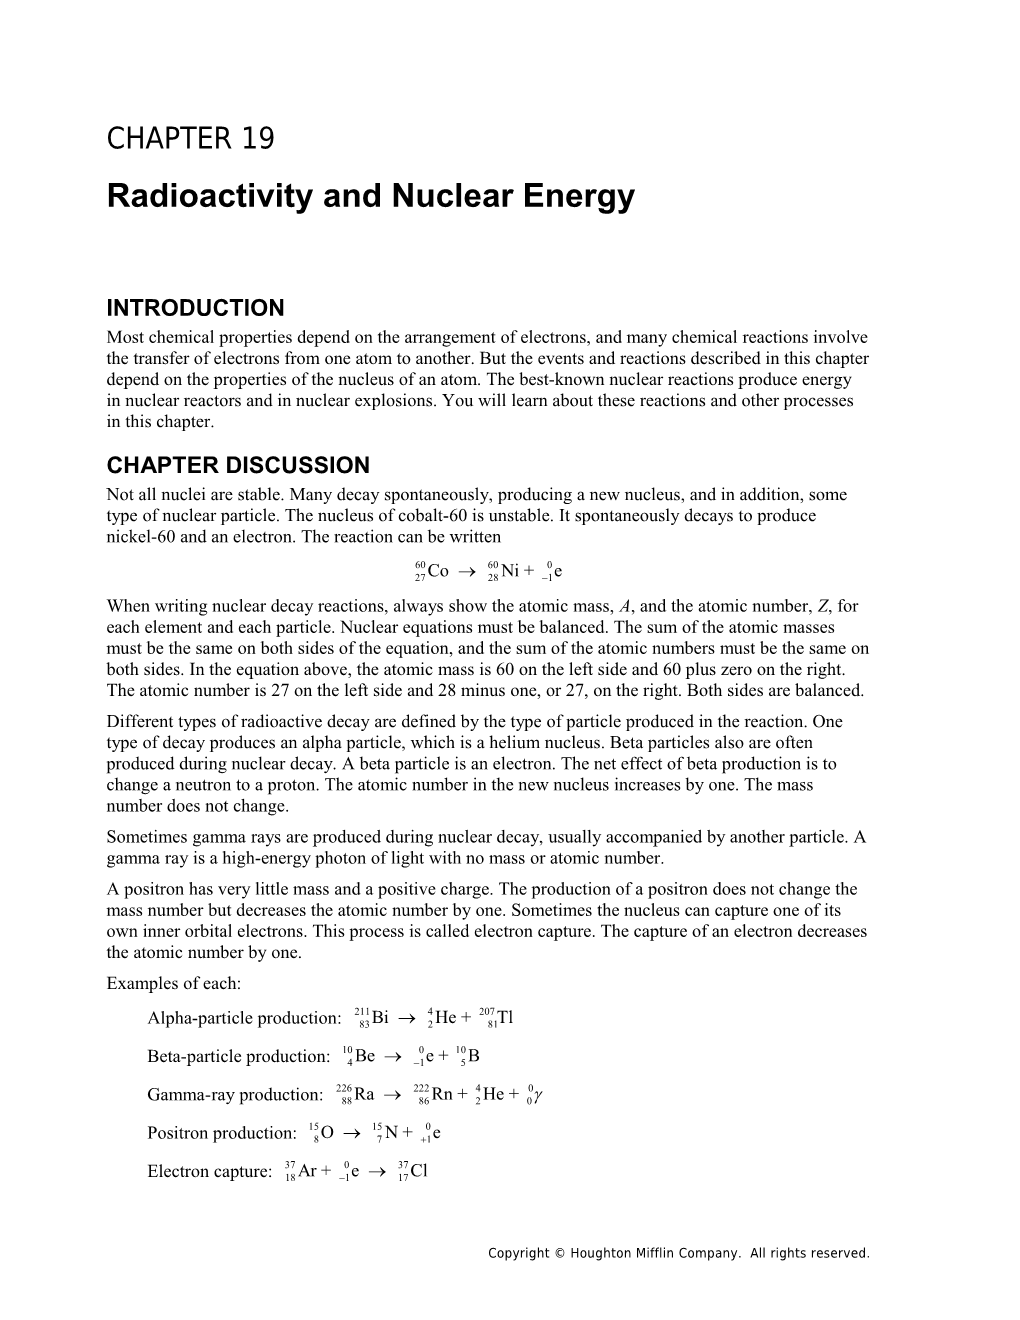 Chapter 19: Radioactivity and Nuclear Energy 1